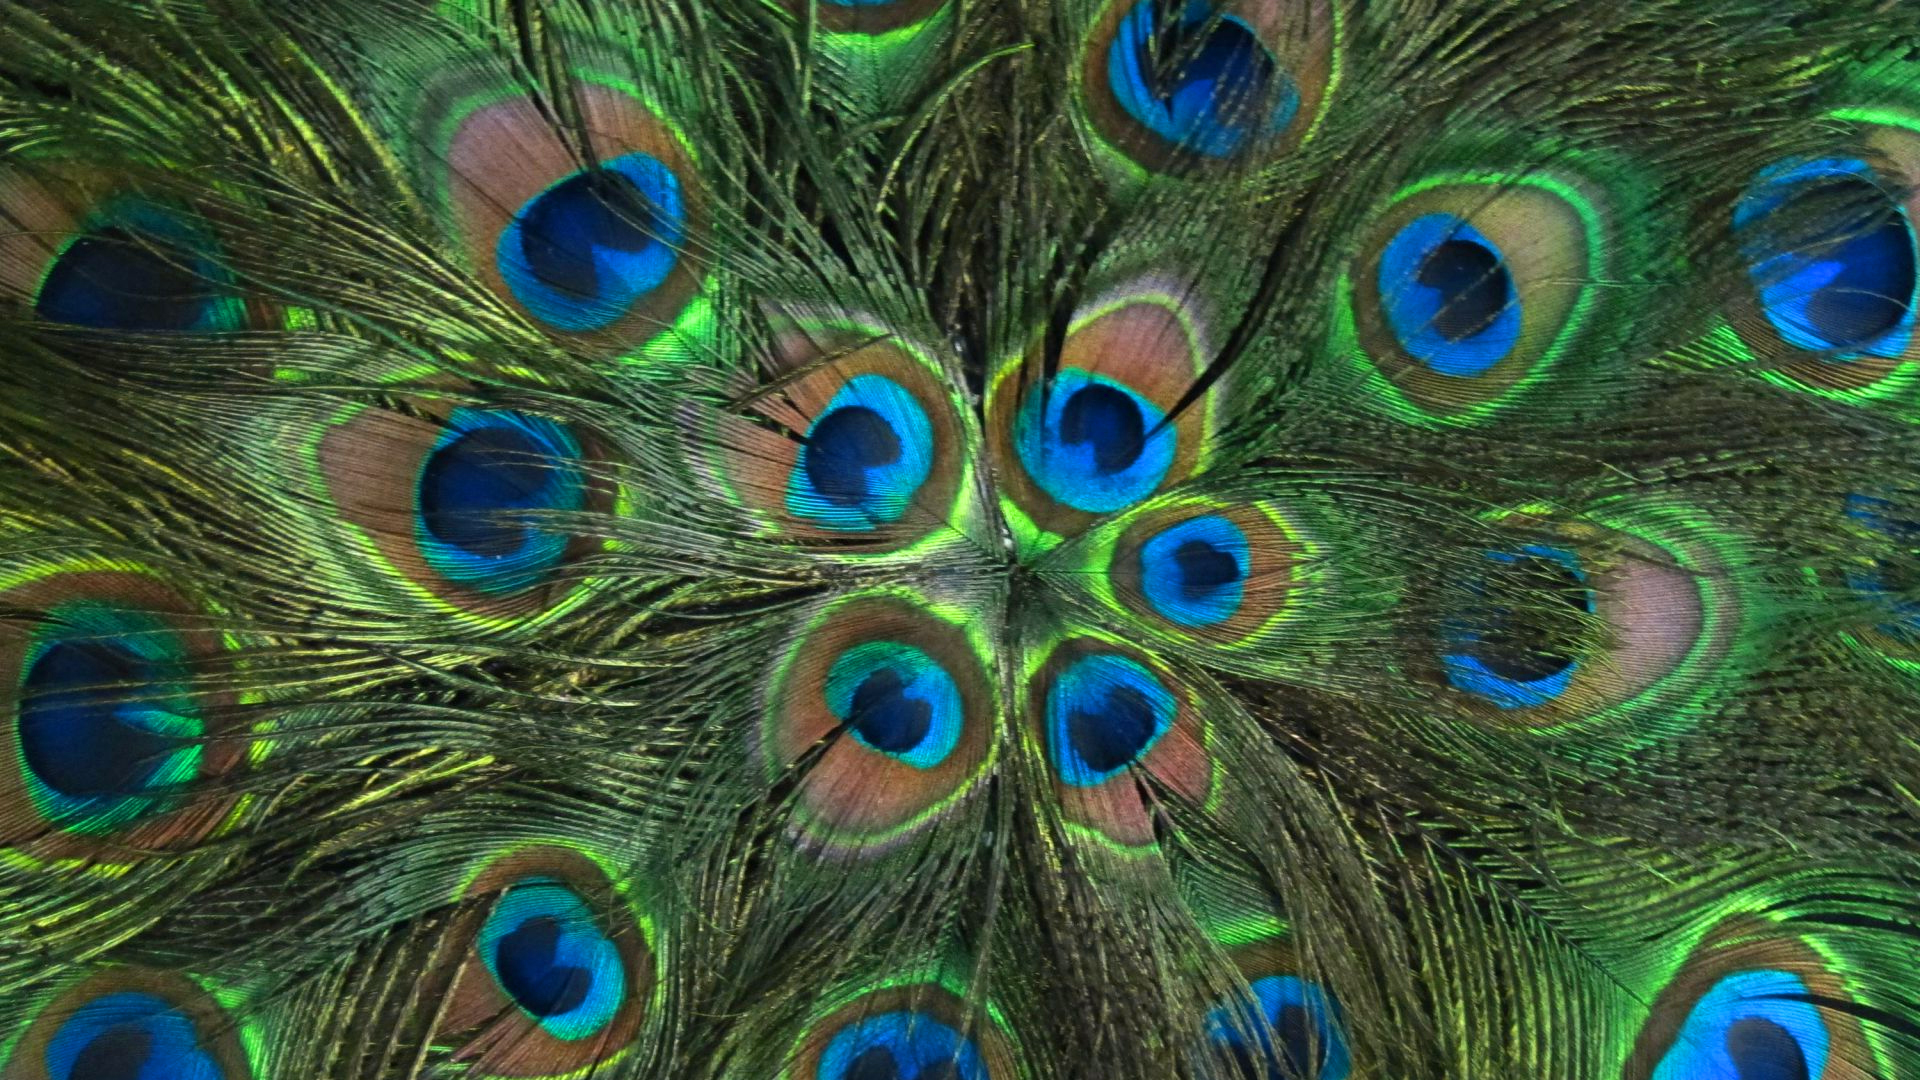 Peacock Feathers Choice Wallpaper